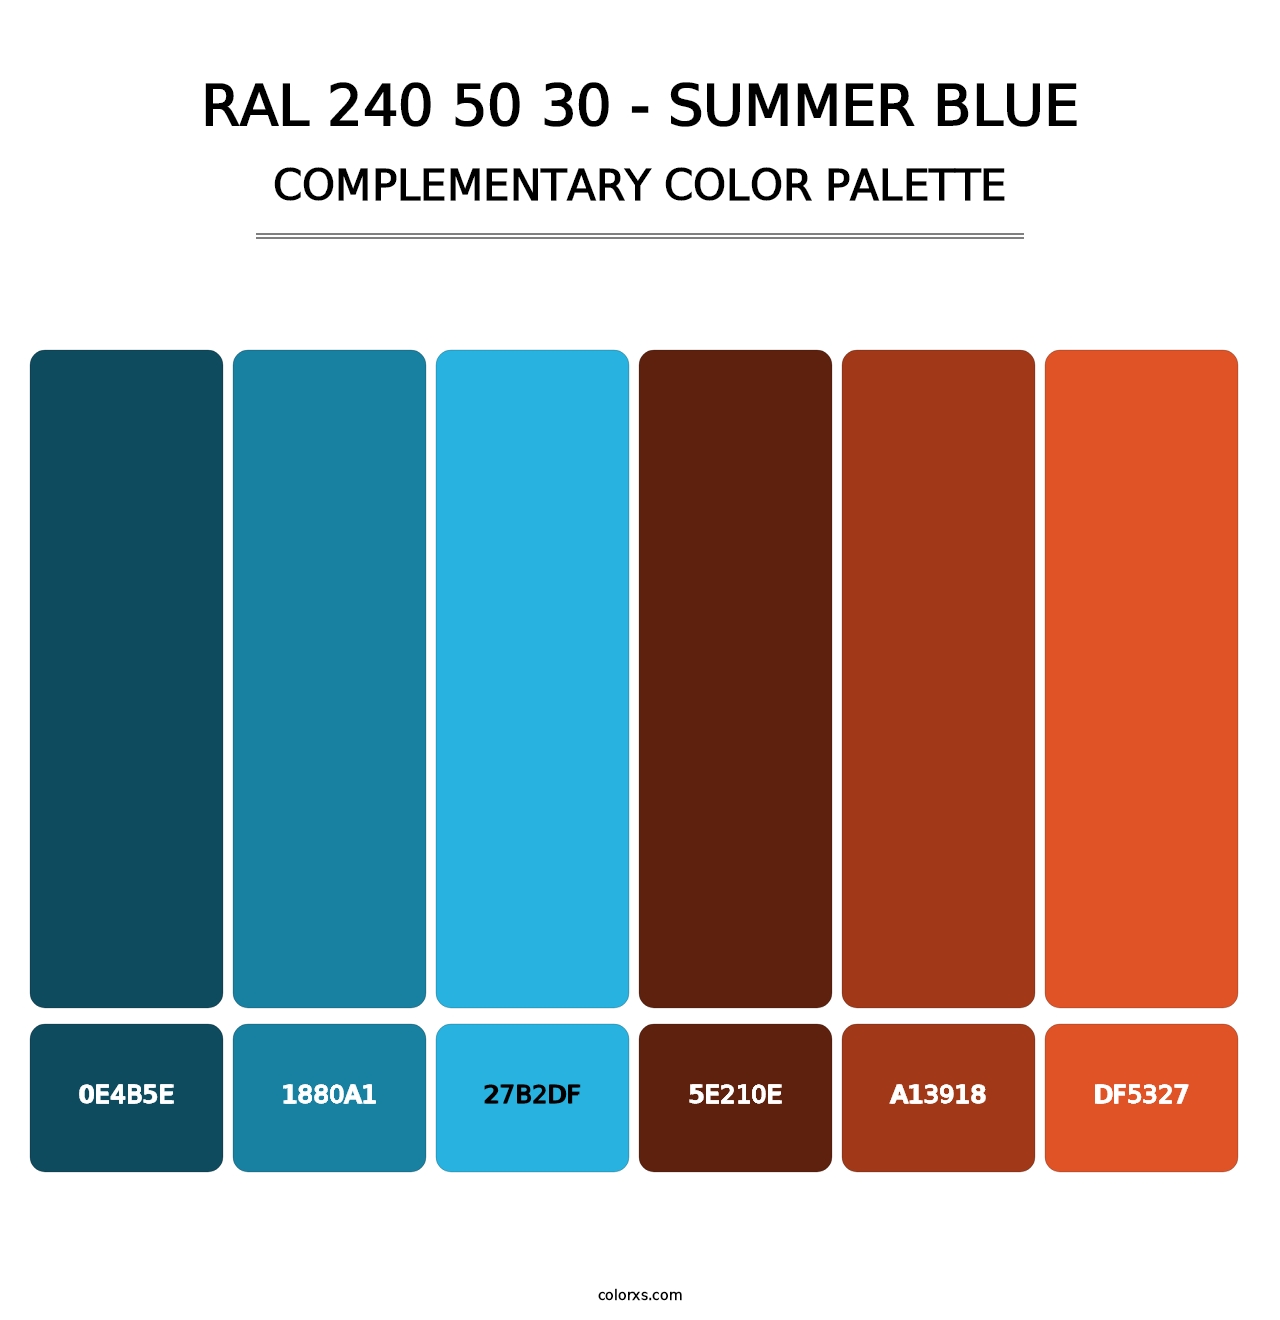 RAL 240 50 30 - Summer Blue - Complementary Color Palette